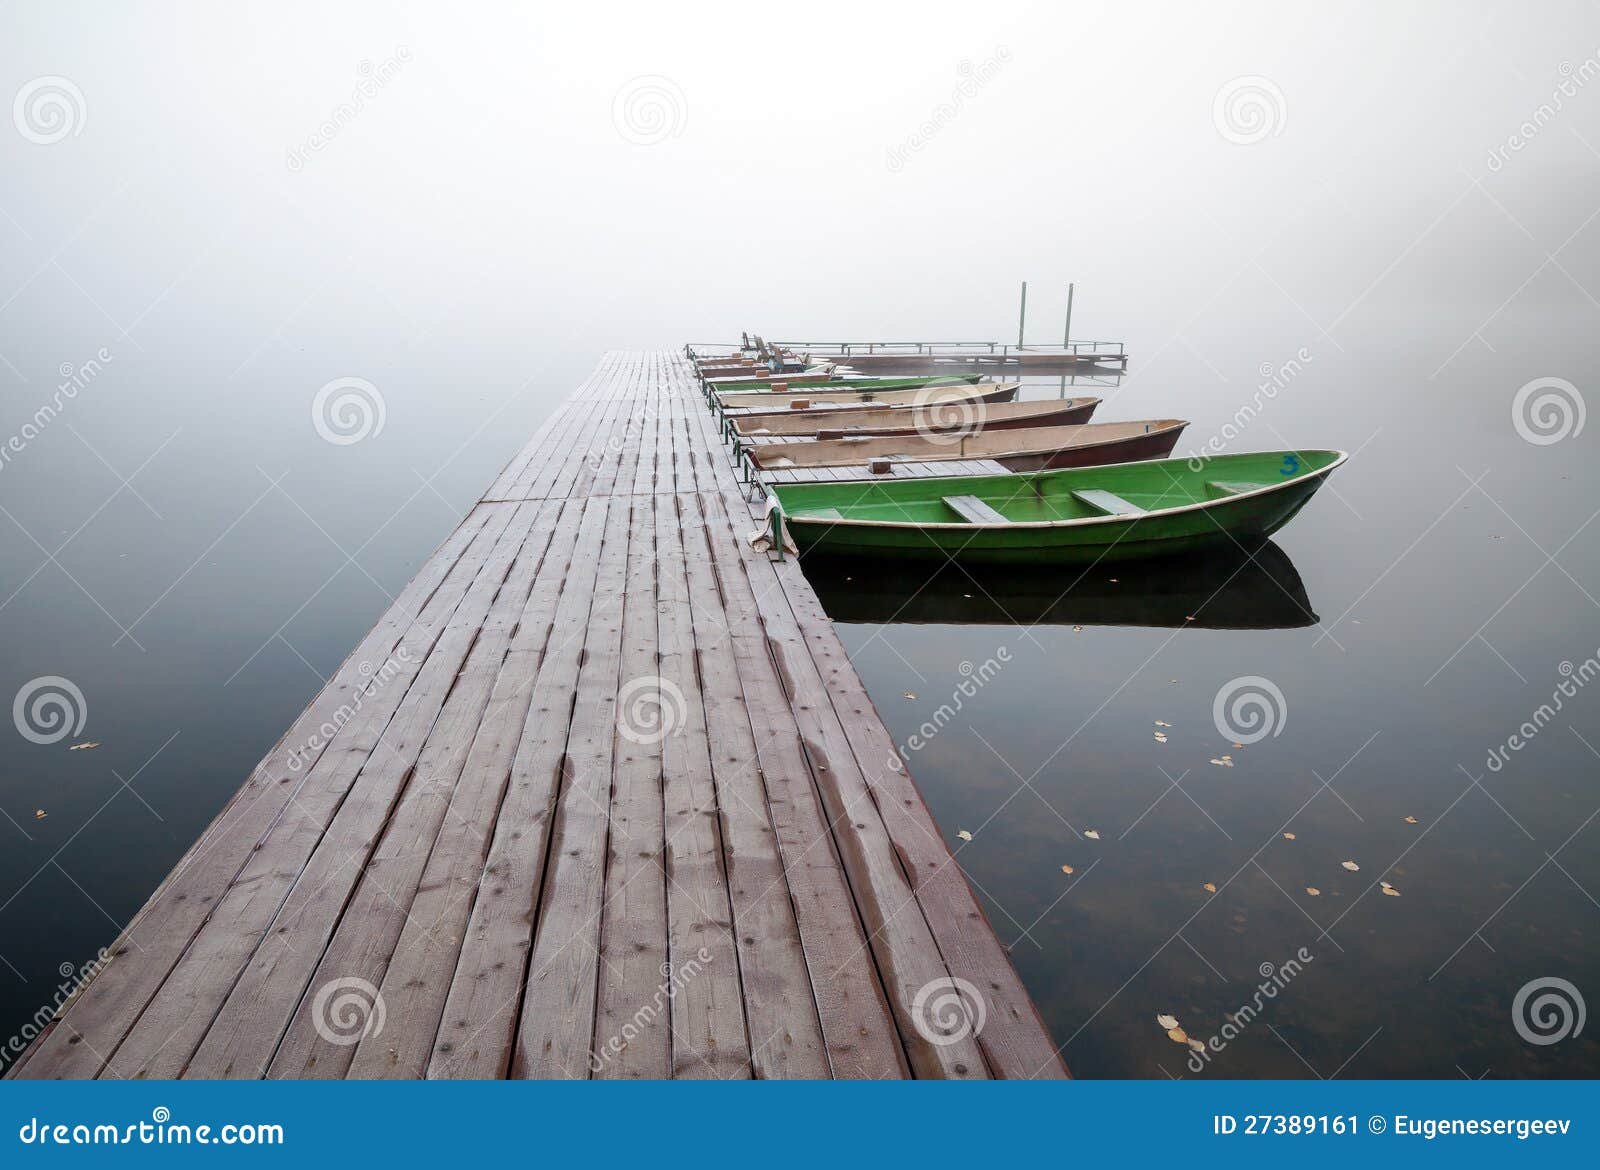 Small Pier With Boats On Lake In Foggy Morning Stock Image ...